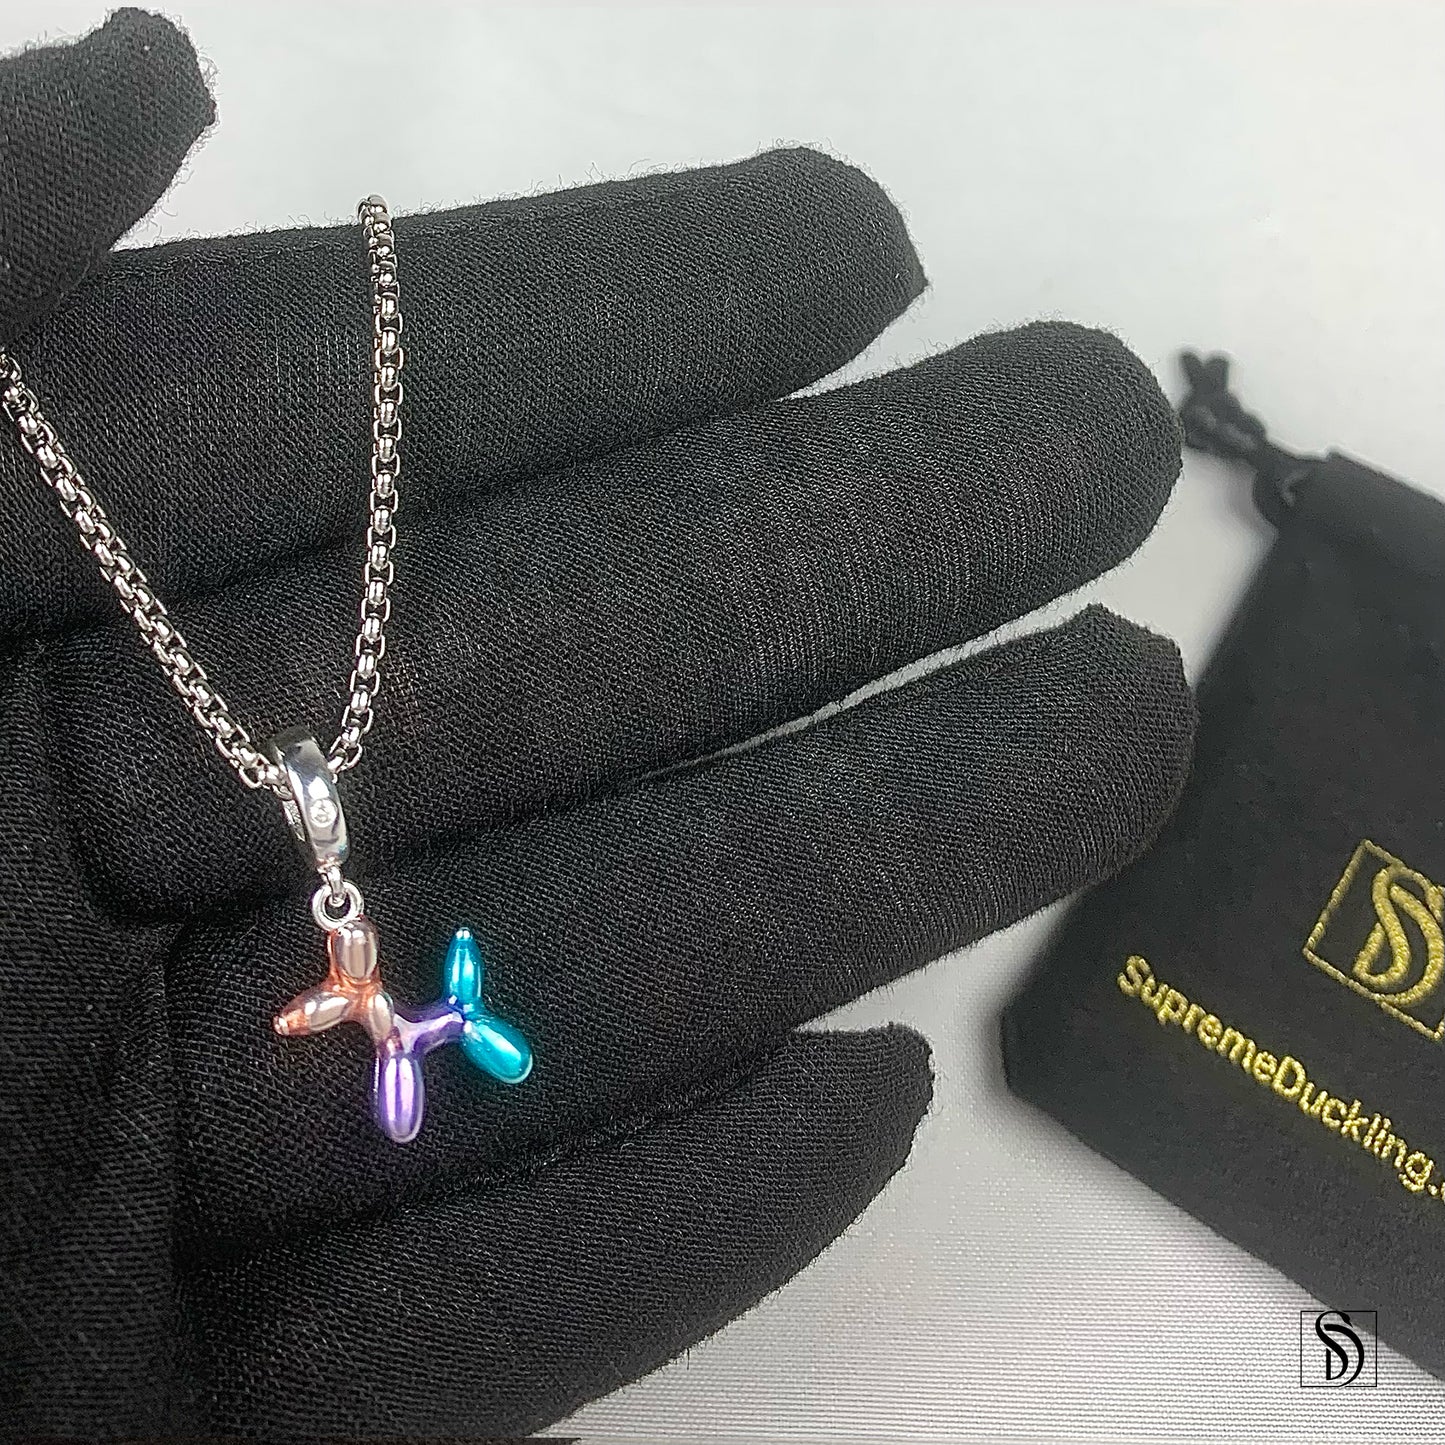 Colorful Balloon Dog Pendant Necklace